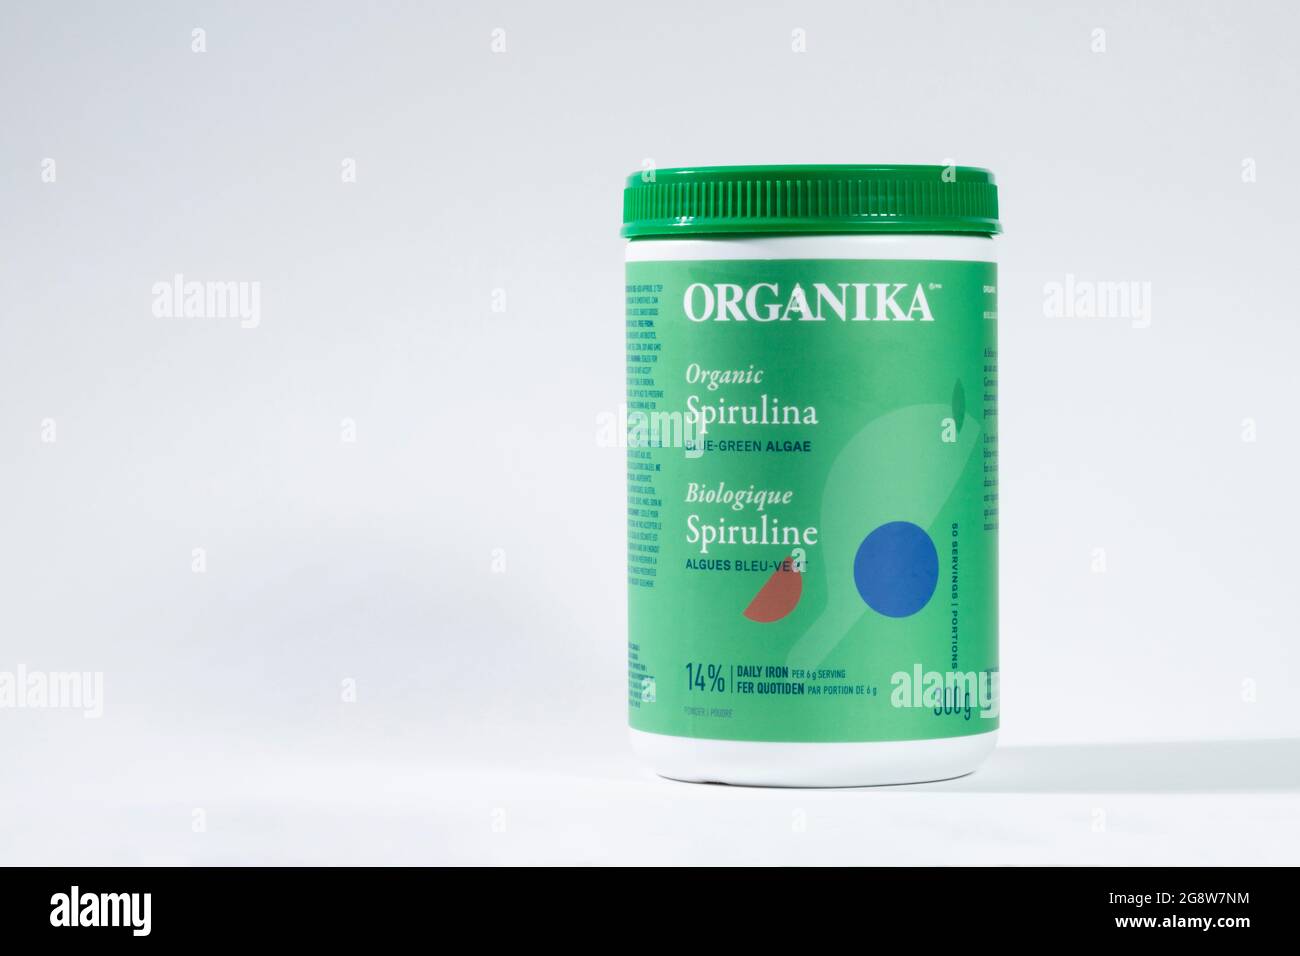 Organic Spirulina powder is in a sealed package container. Organika brand Spirulina powder isolated on white background. Stock Photo